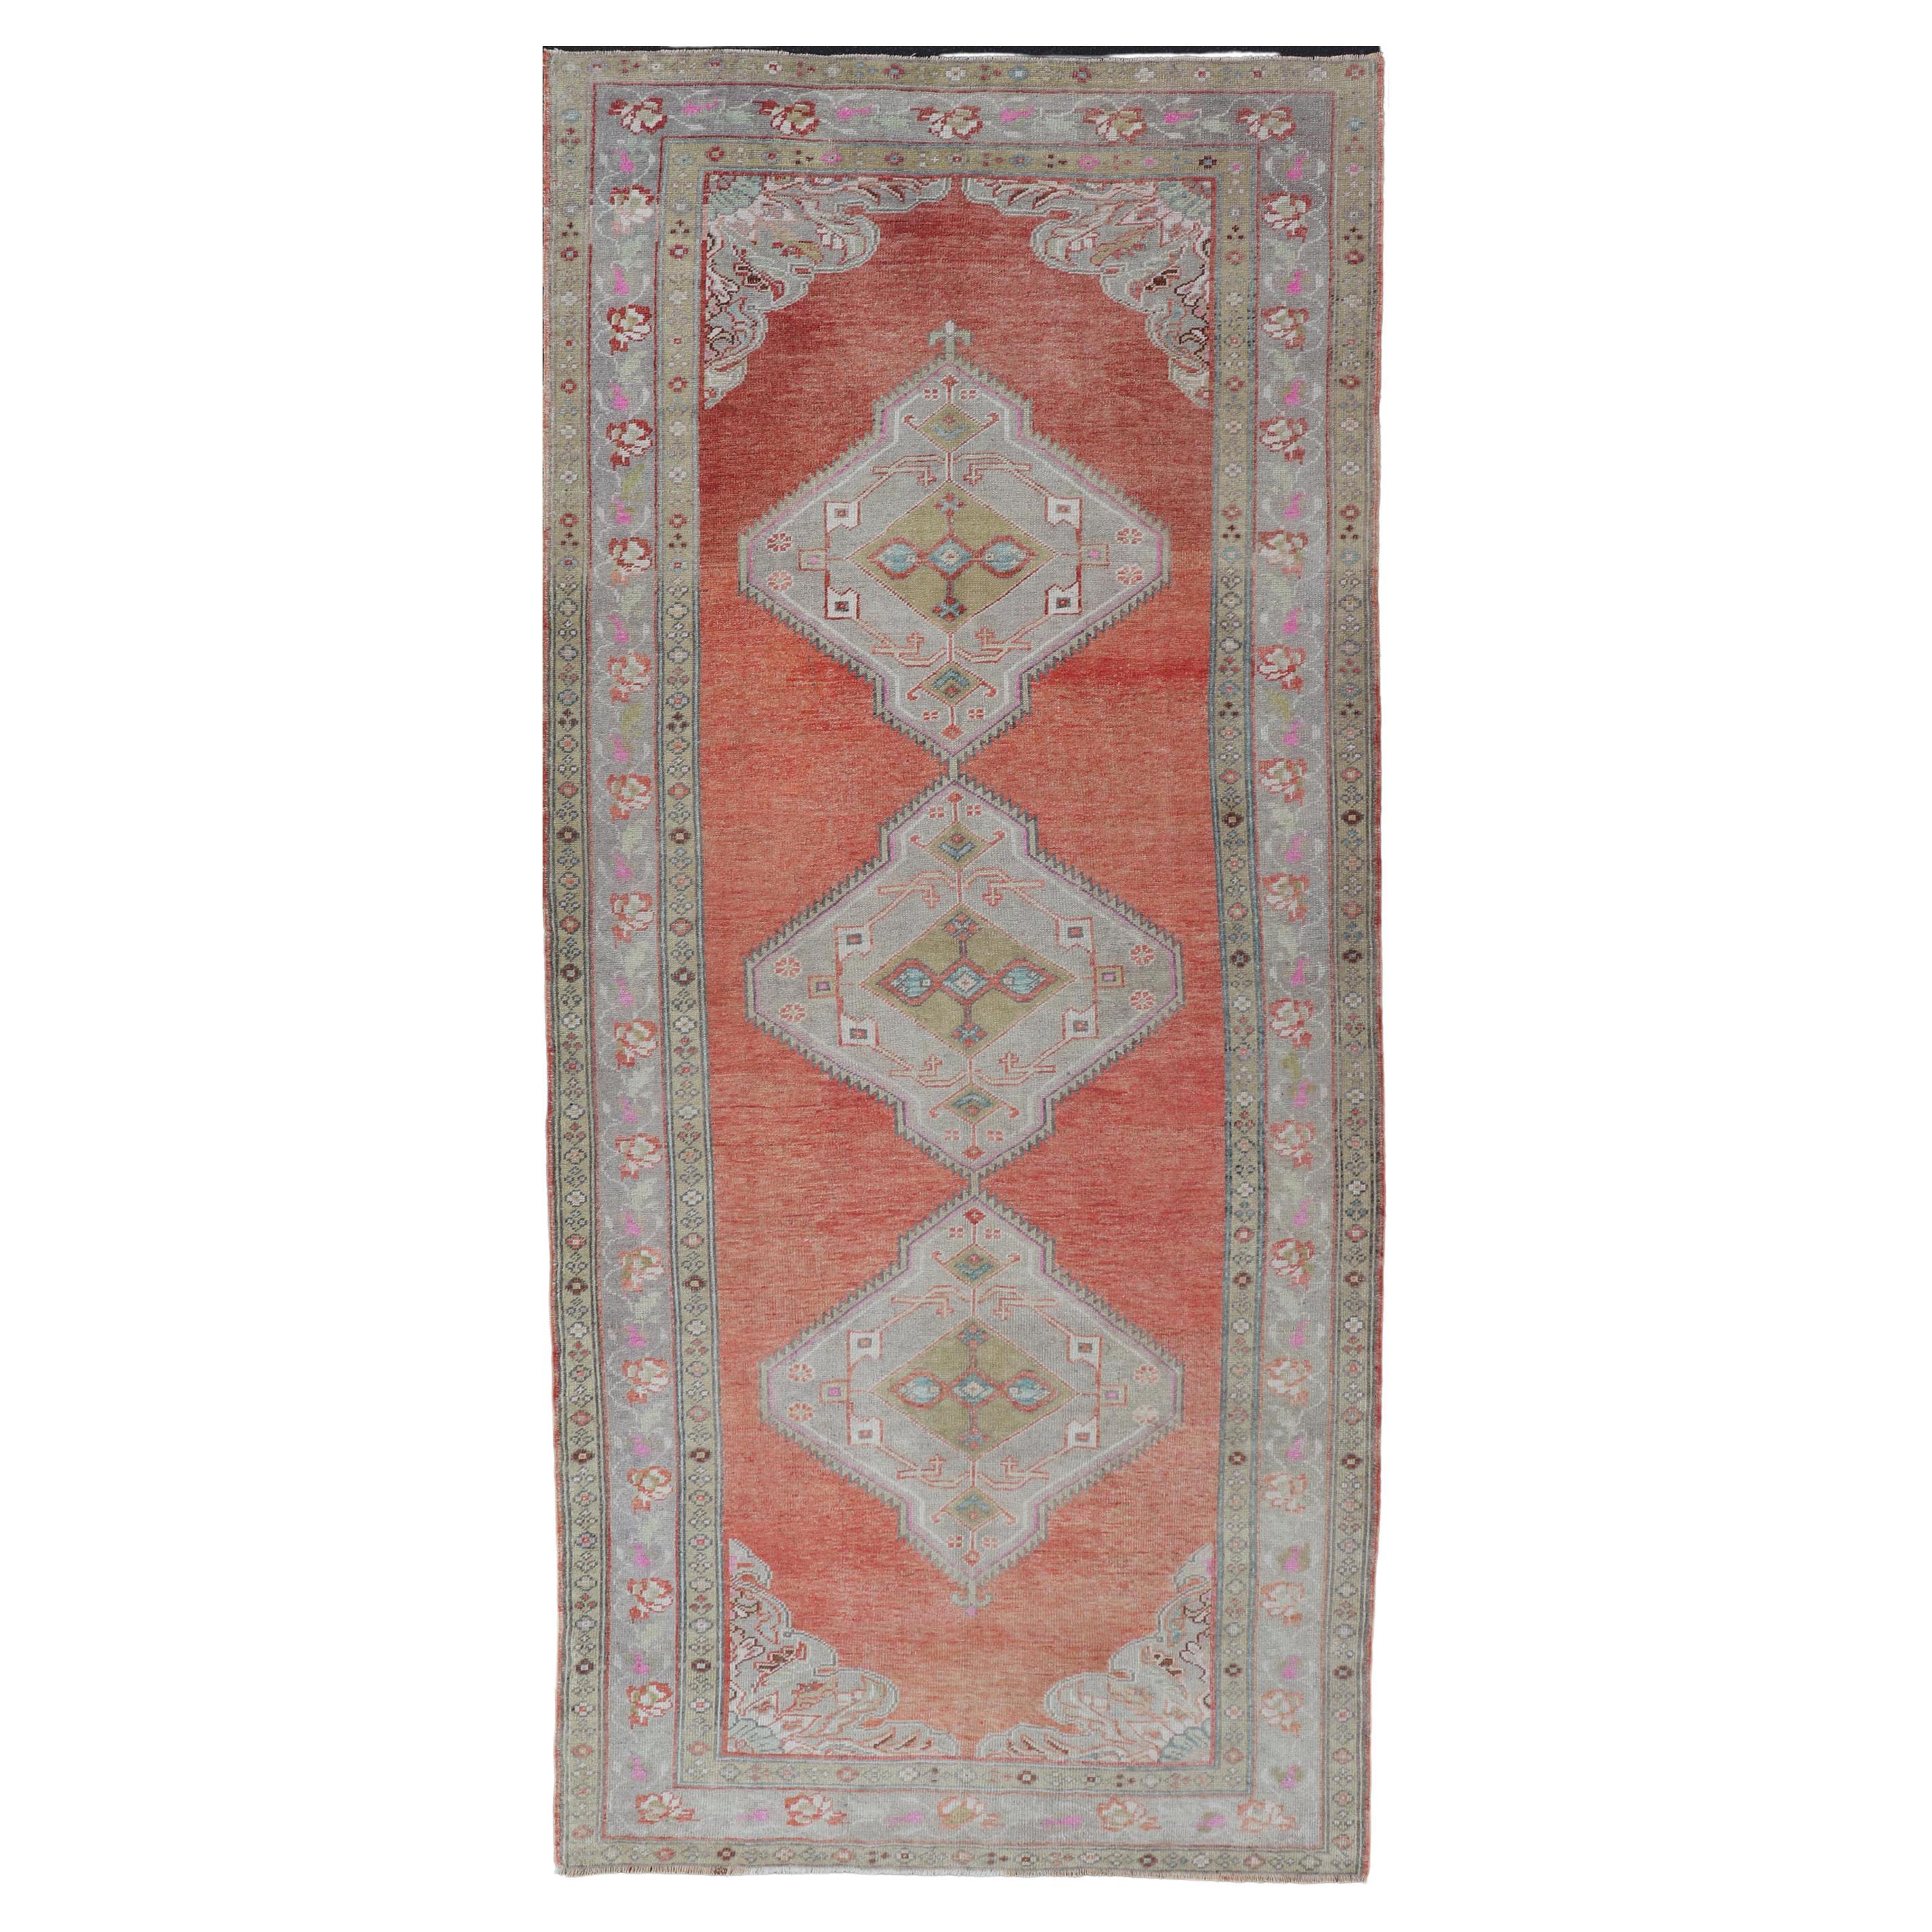 Vintage Turkish Oushak Gallery Runner in Coral, Grey, Green, Lavender, Yellow